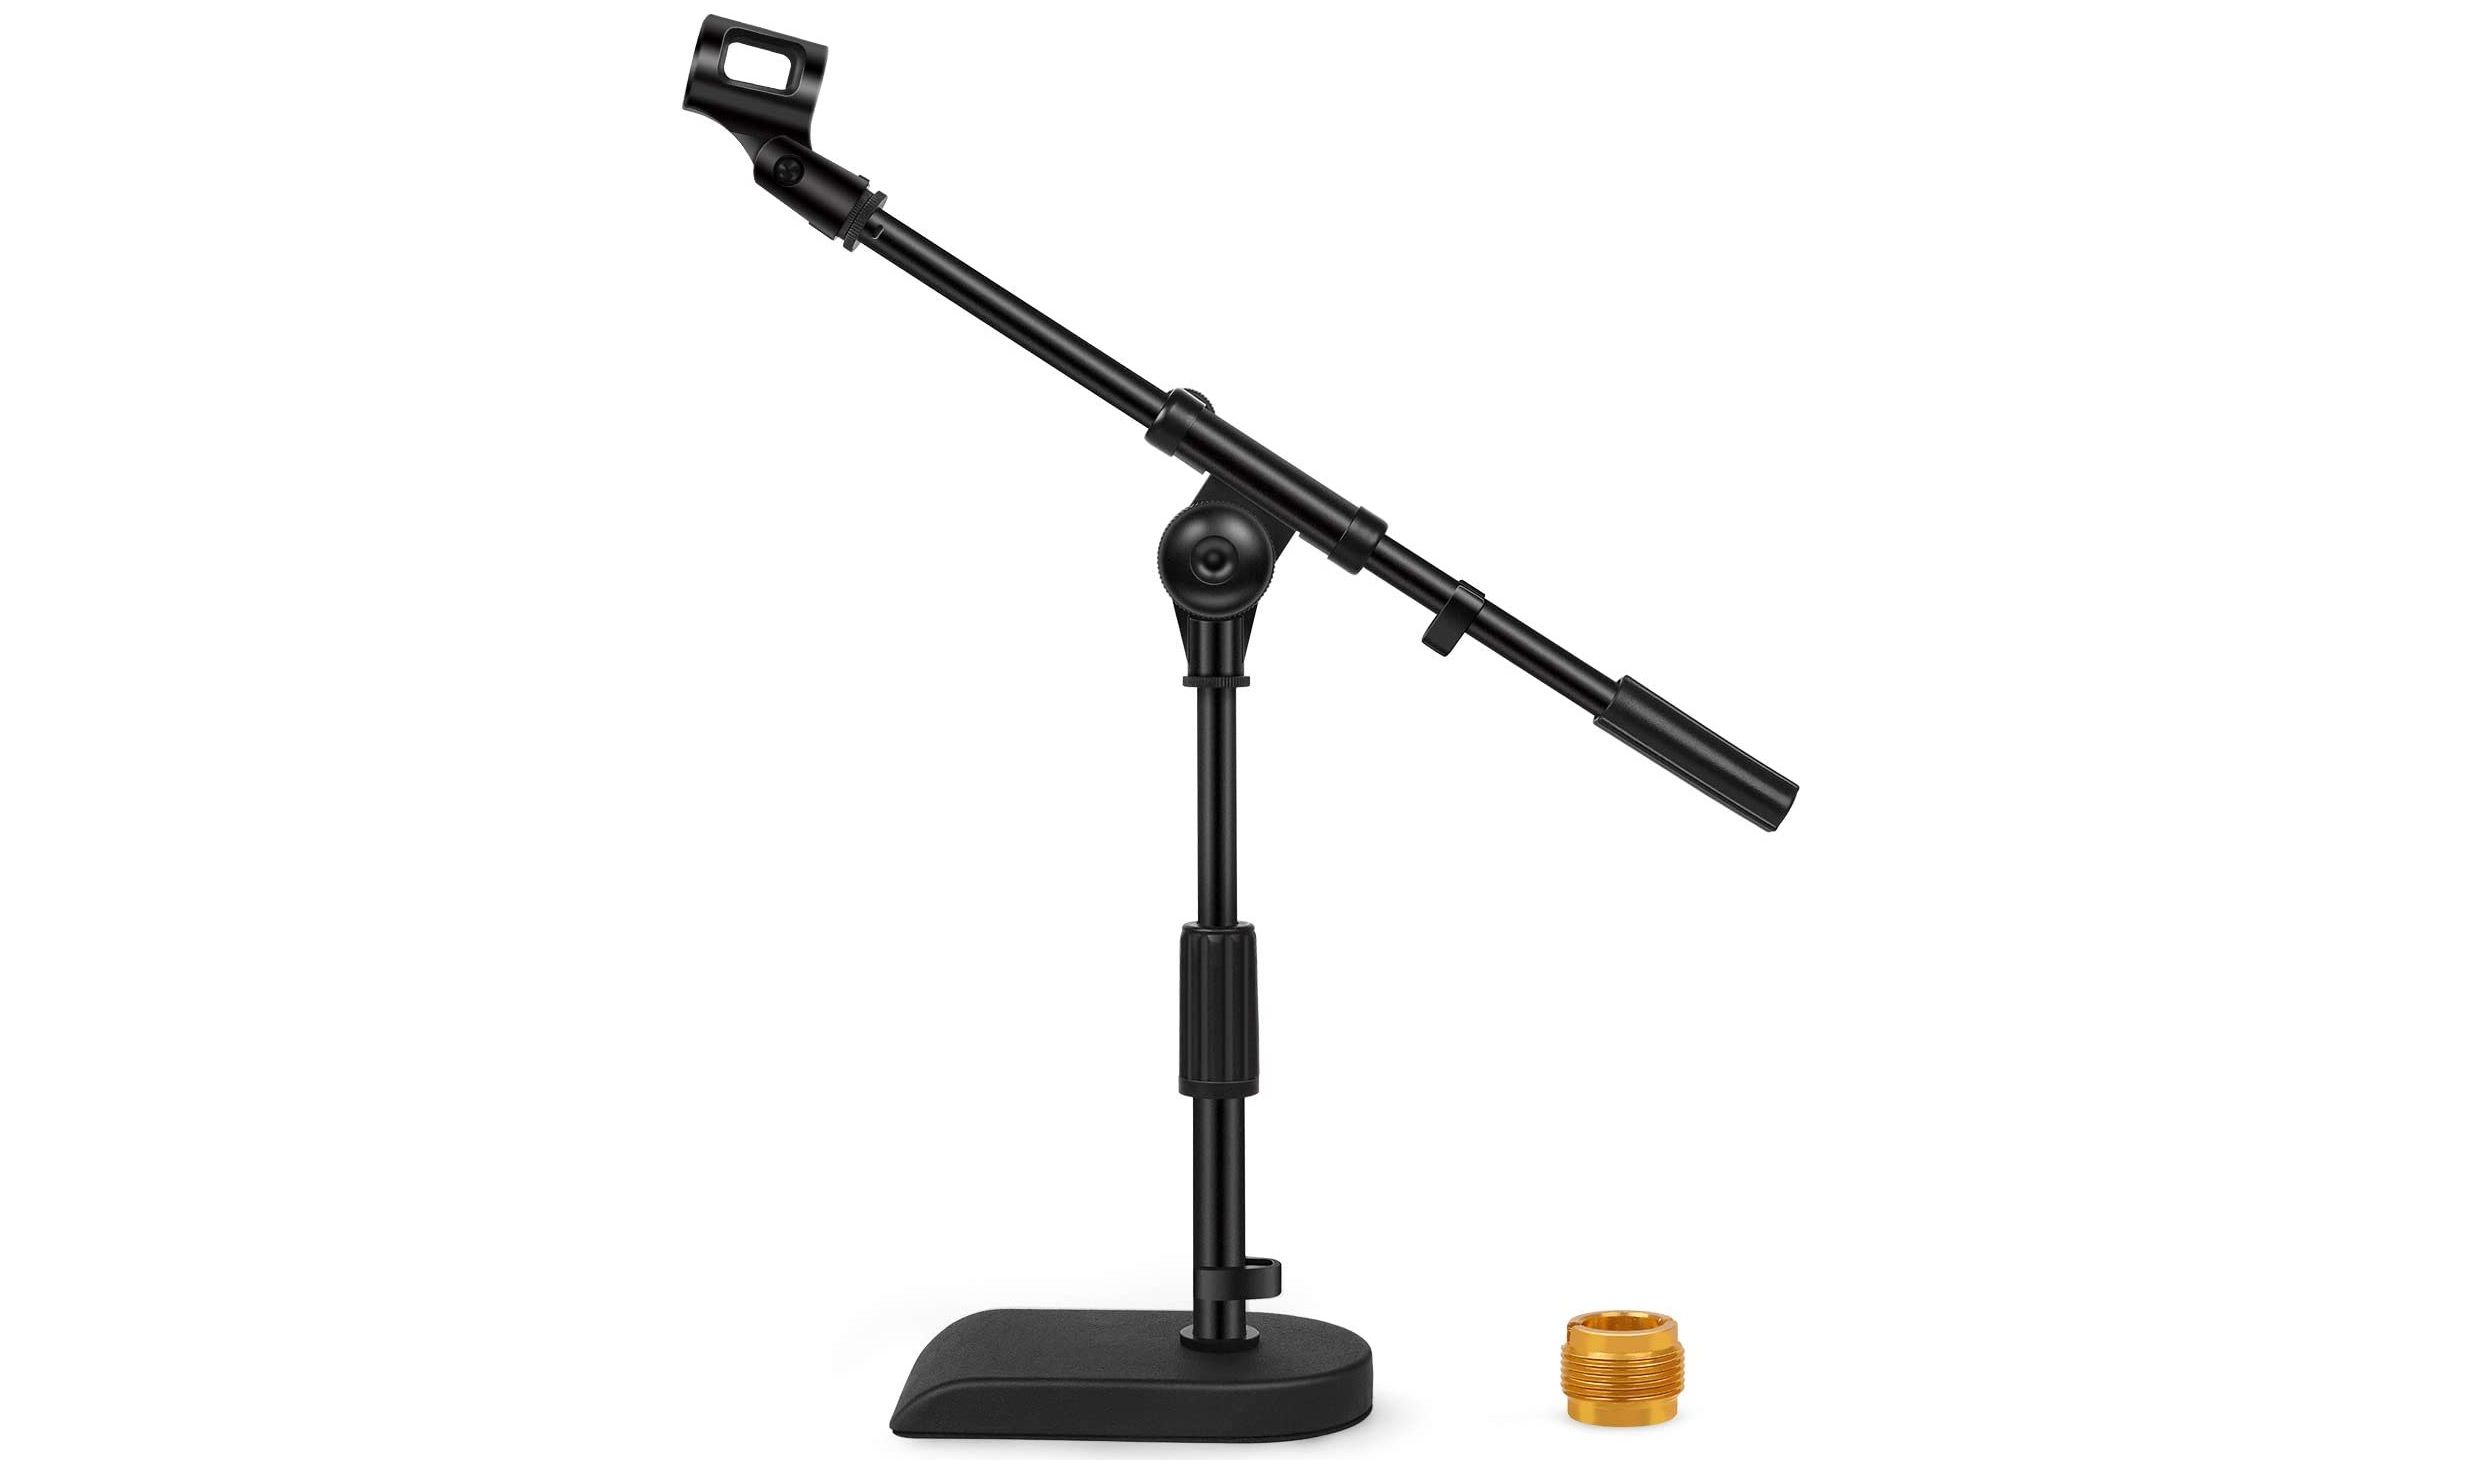 the innogear adjustable microphone stand featuring a counterweight